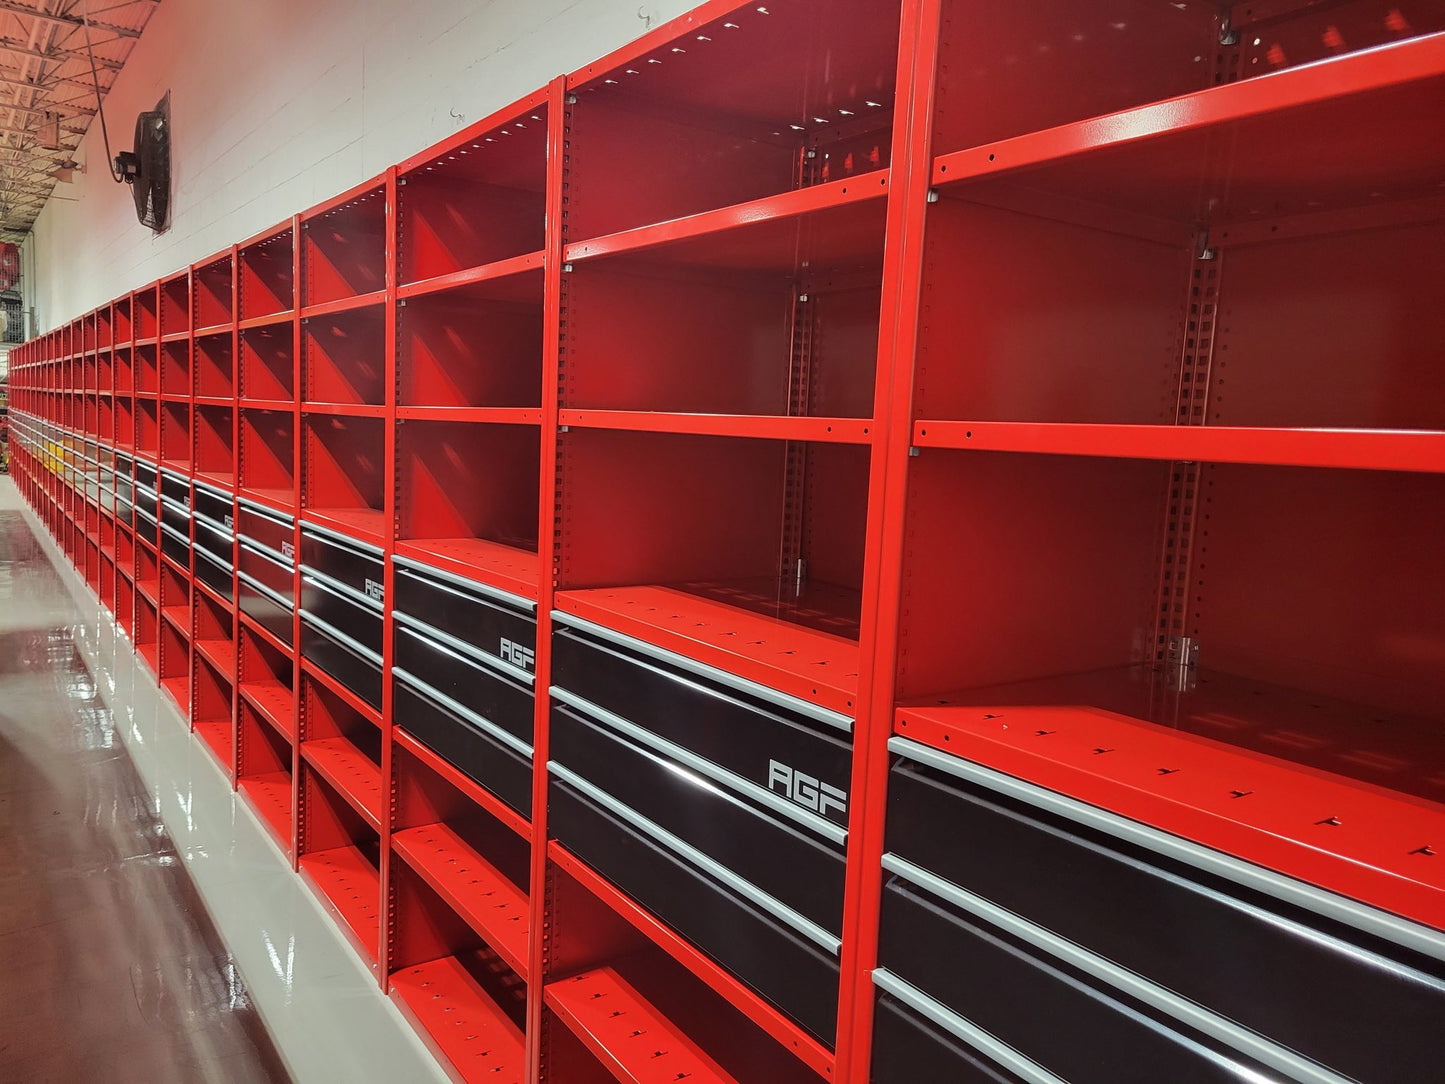 Shelving system 75 height x 48 width x 12 depth | Option: Open / Closed